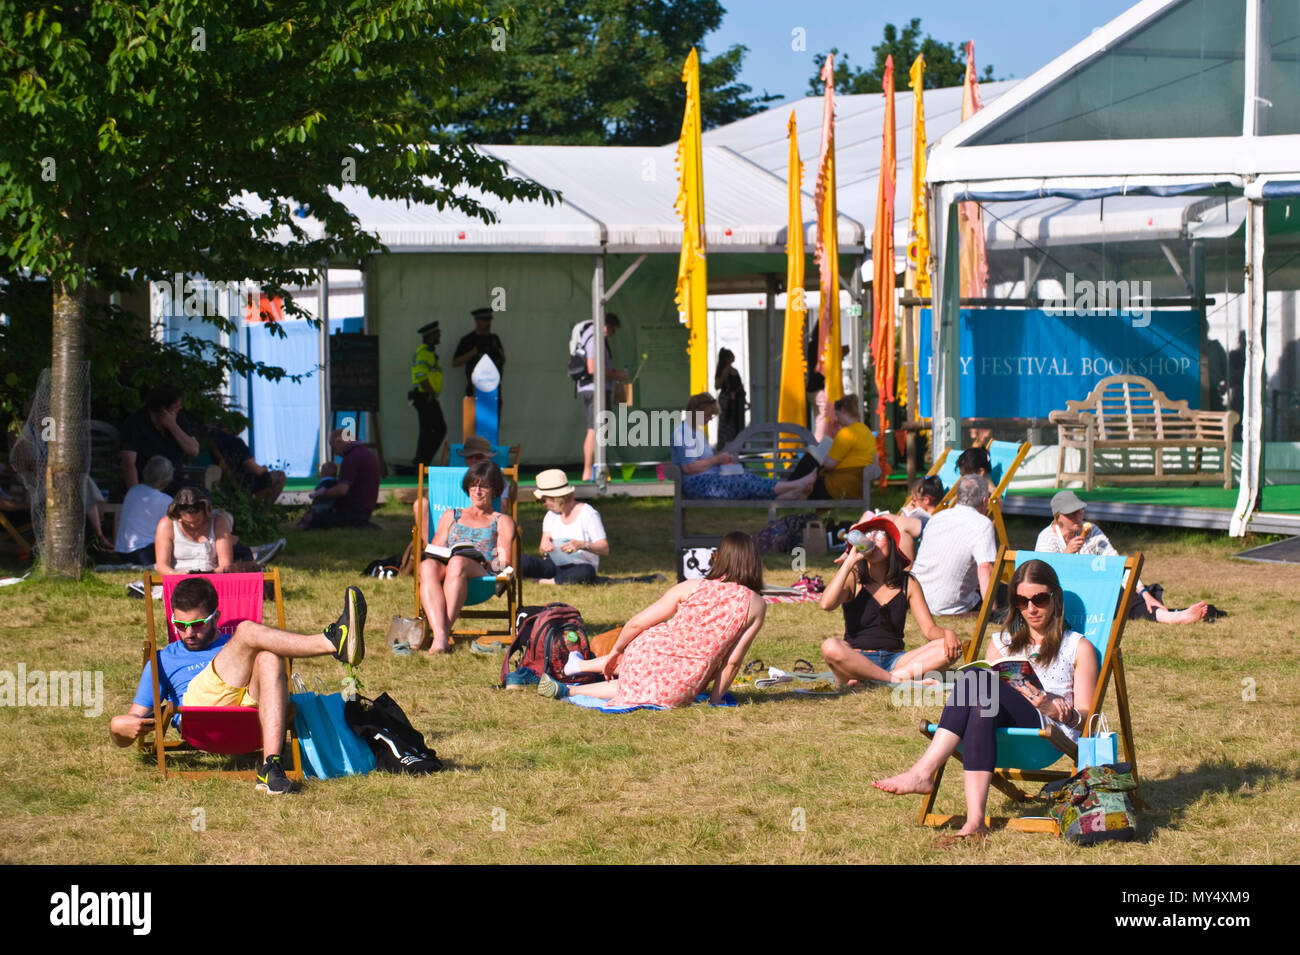 People relaxing on lawn in late afternoon summer sunshine in garden area at Hay Festival 2018 Hay-on-Wye Powys Wales UK Stock Photo